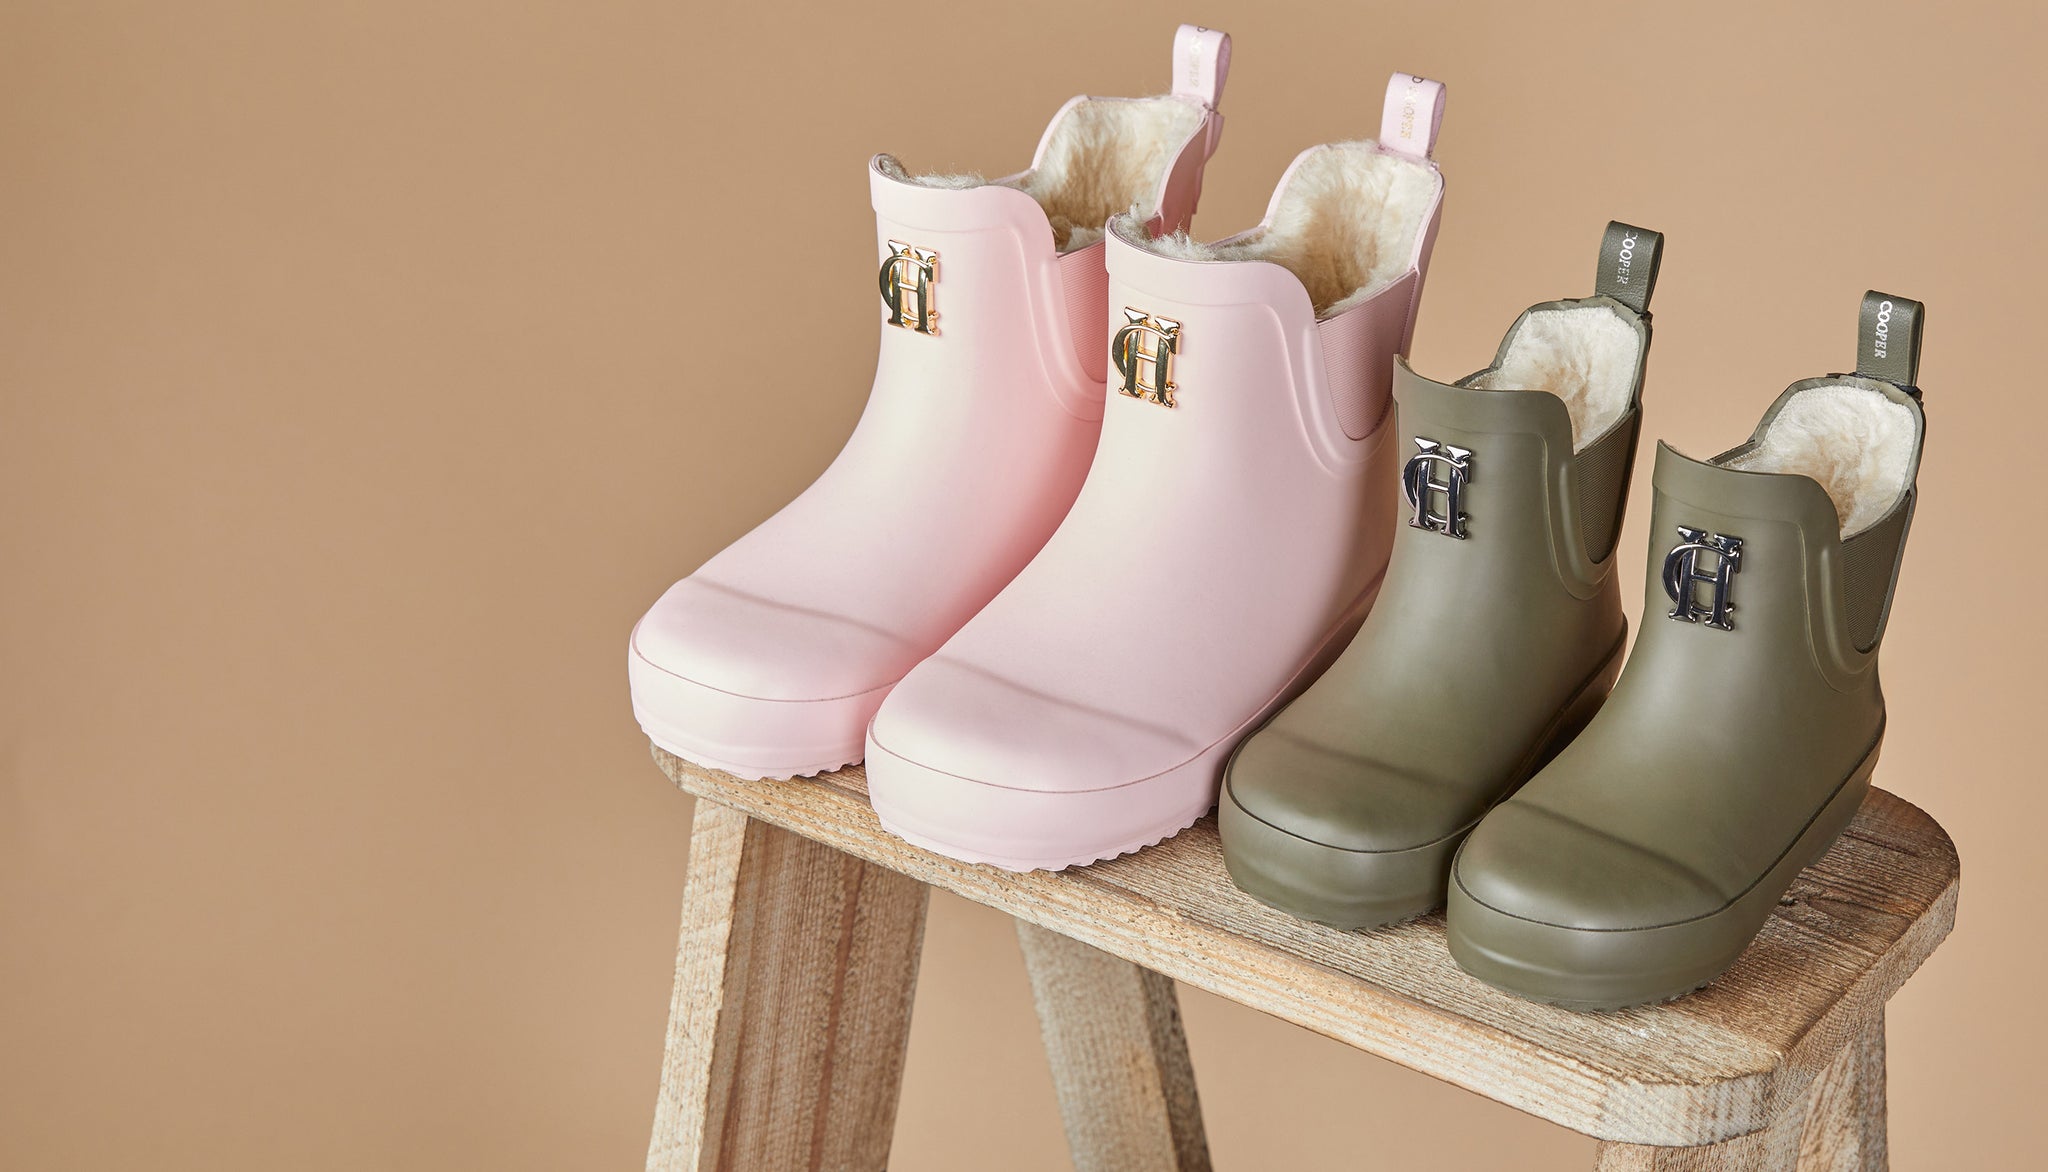 Two pairs of children's wellingtons in pink and green with sherpa lining sat on a stool